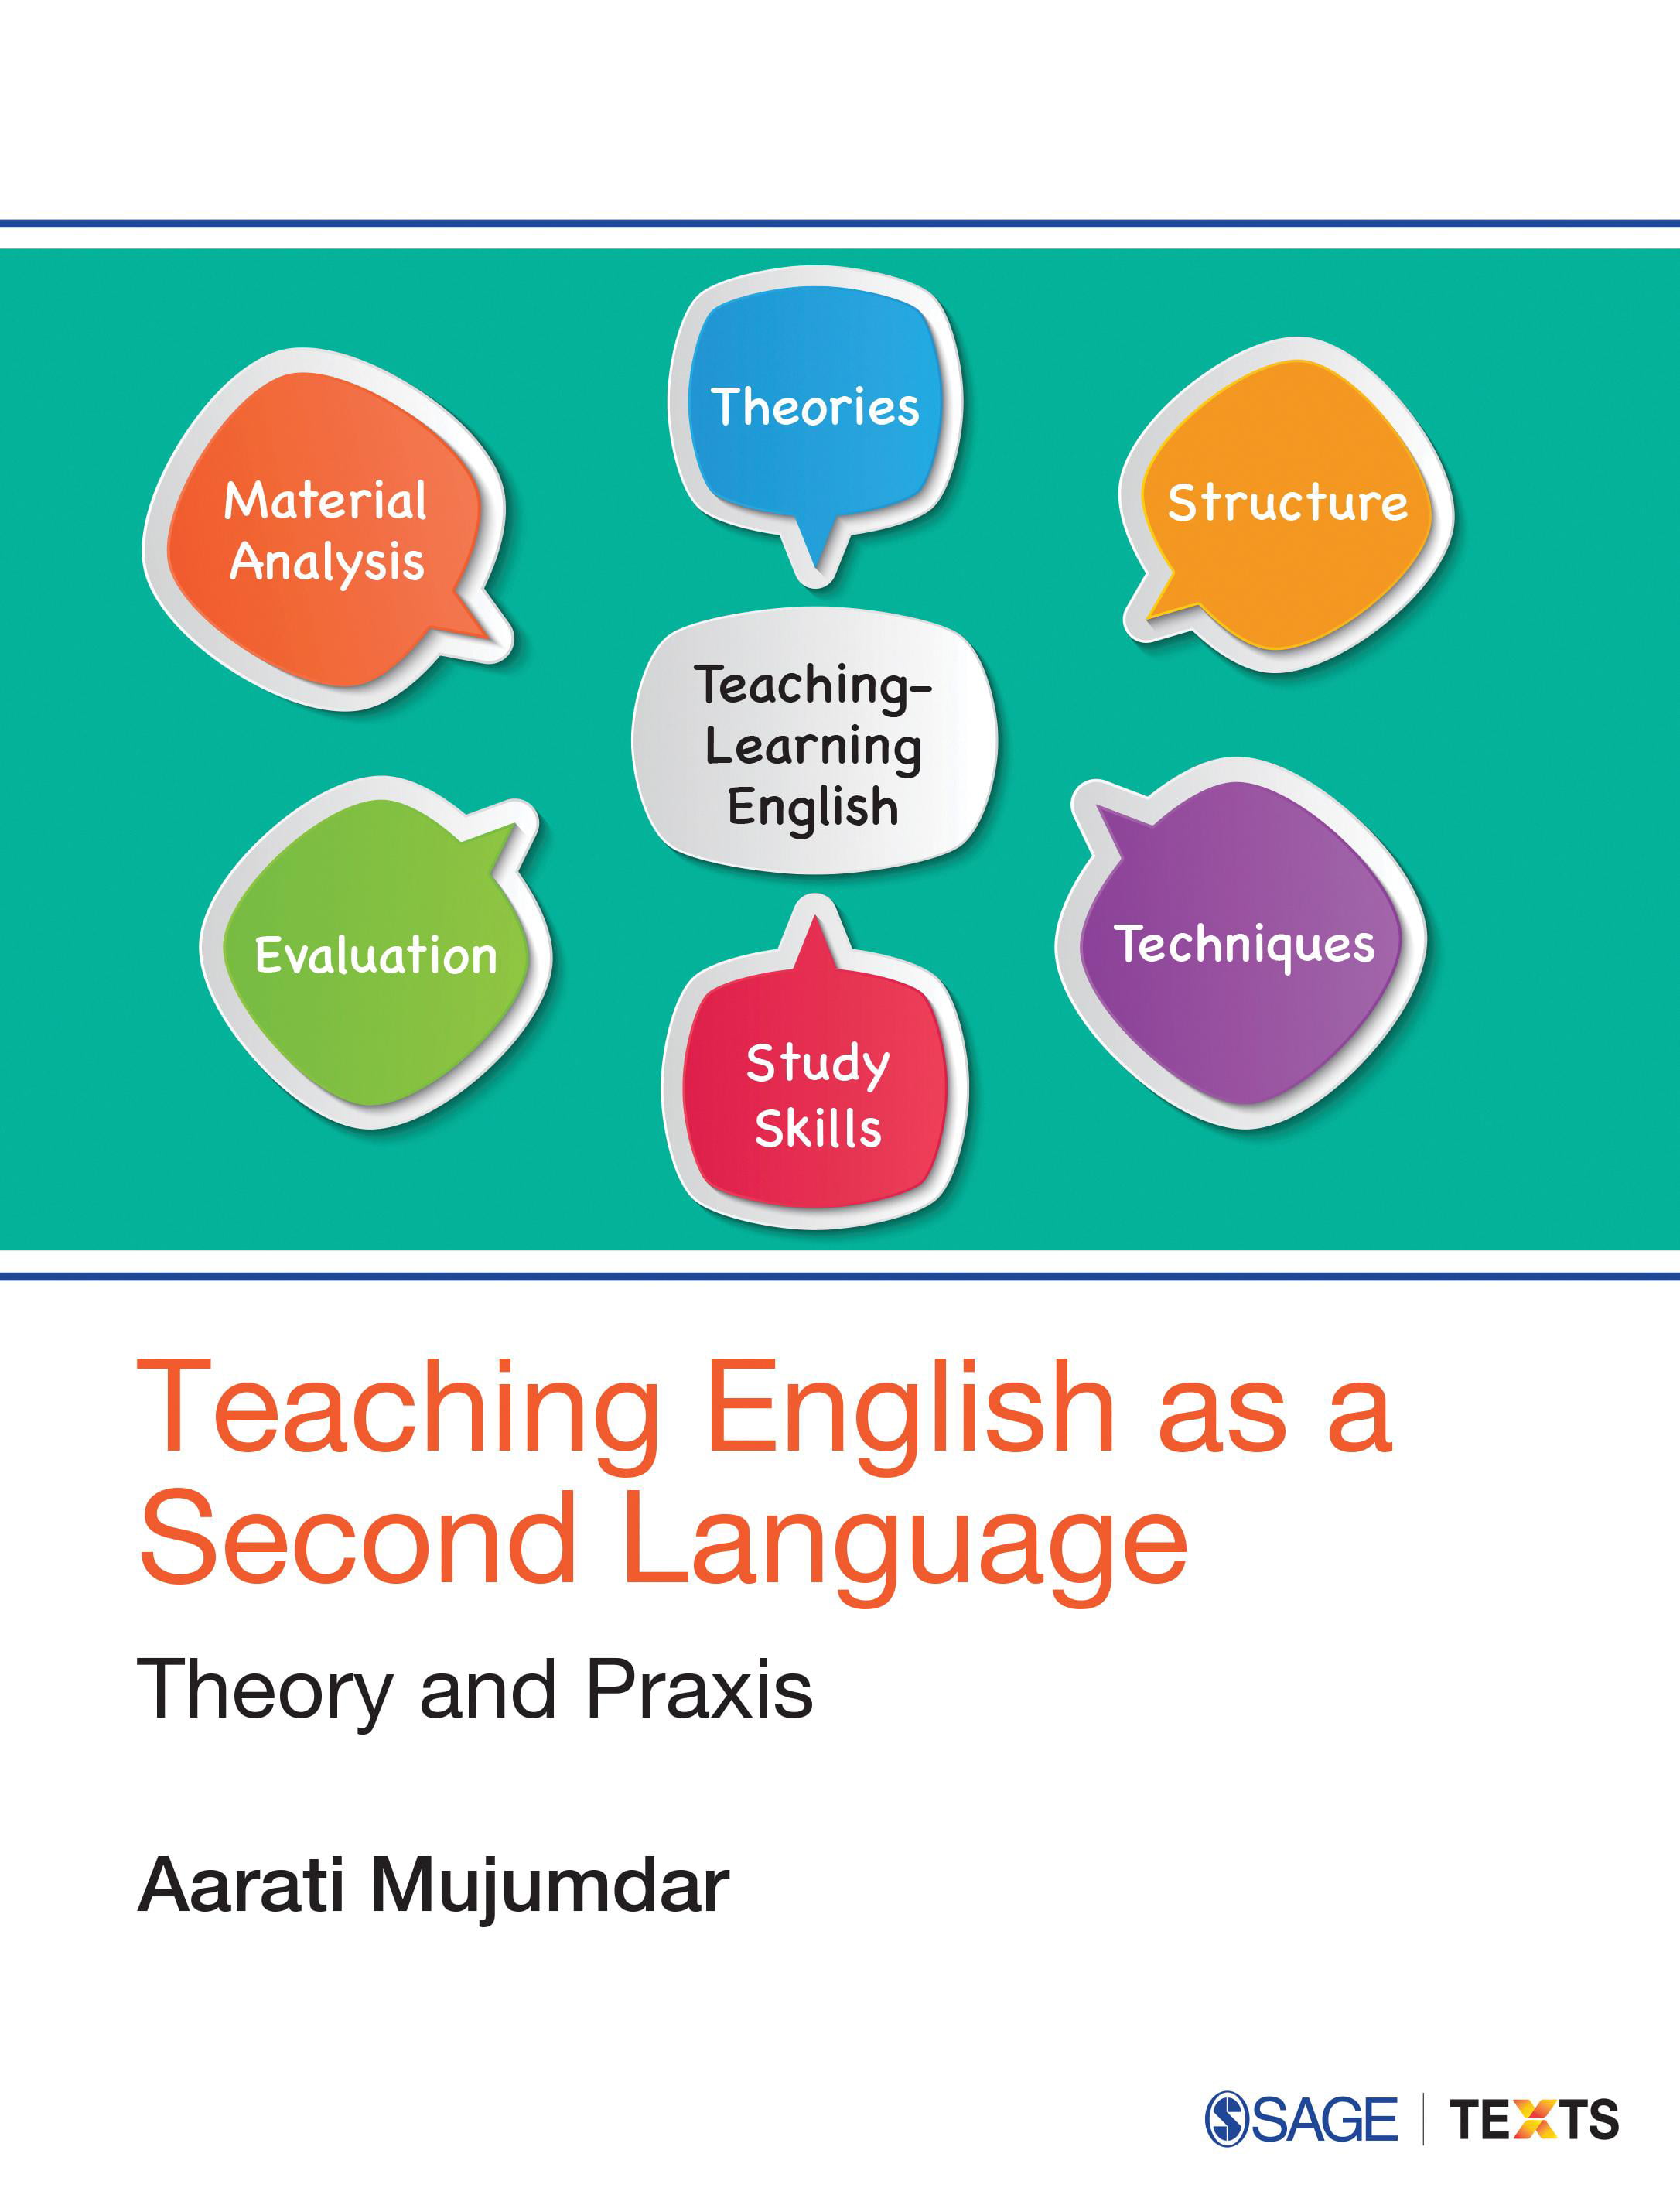 thesis on teaching english as a second language